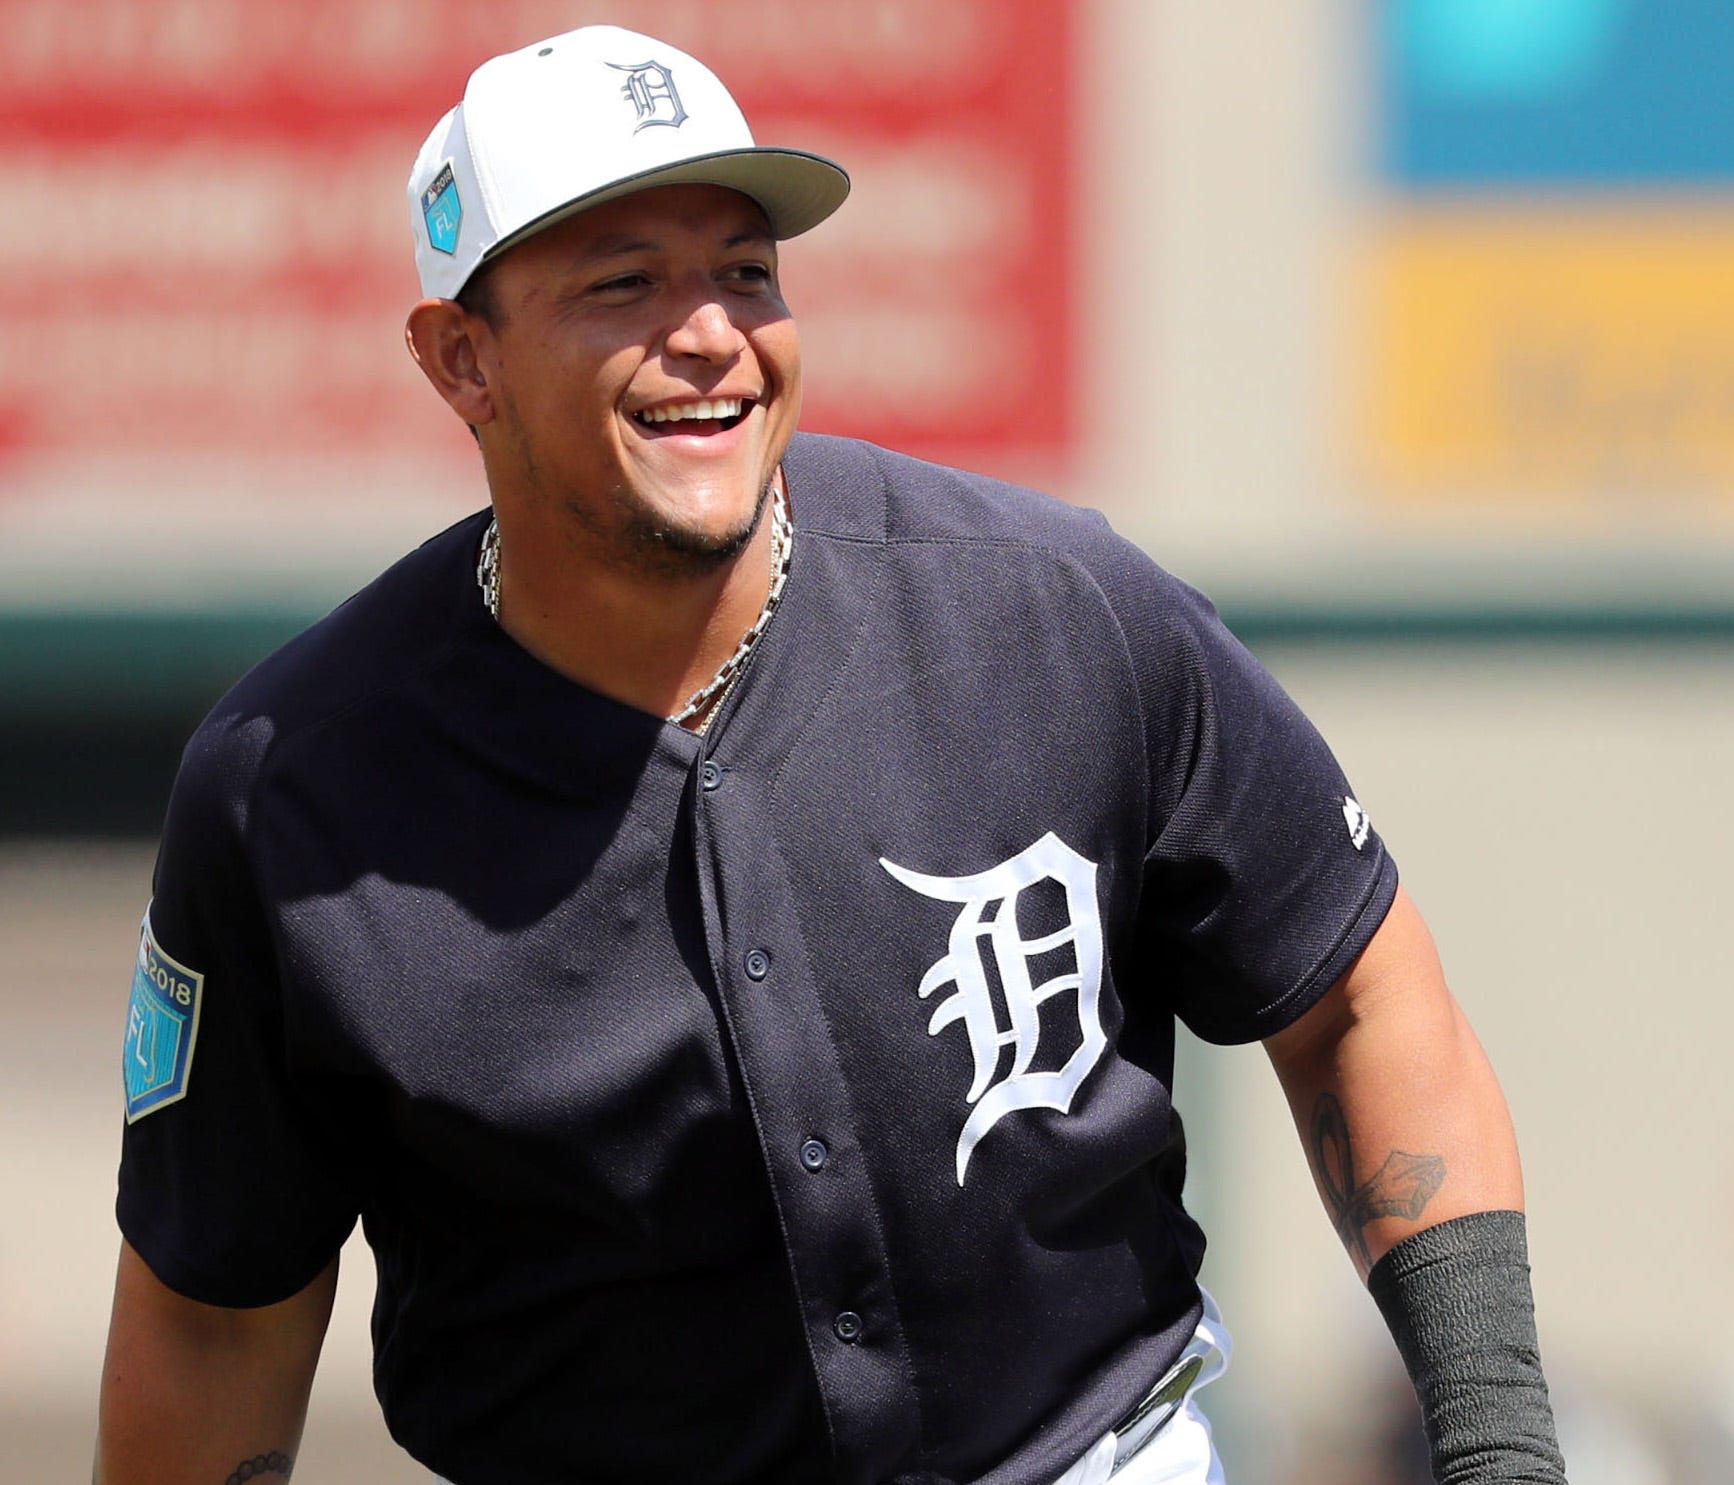 Mar 7, 2018; Lakeland, FL, USA; Detroit Tigers first baseman Miguel Cabrera (24) smiles prior to the game against the Toronto Blue Jays at Publix Field at Joker Marchant Stadium. Mandatory Credit: Kim Klement-USA TODAY Sports